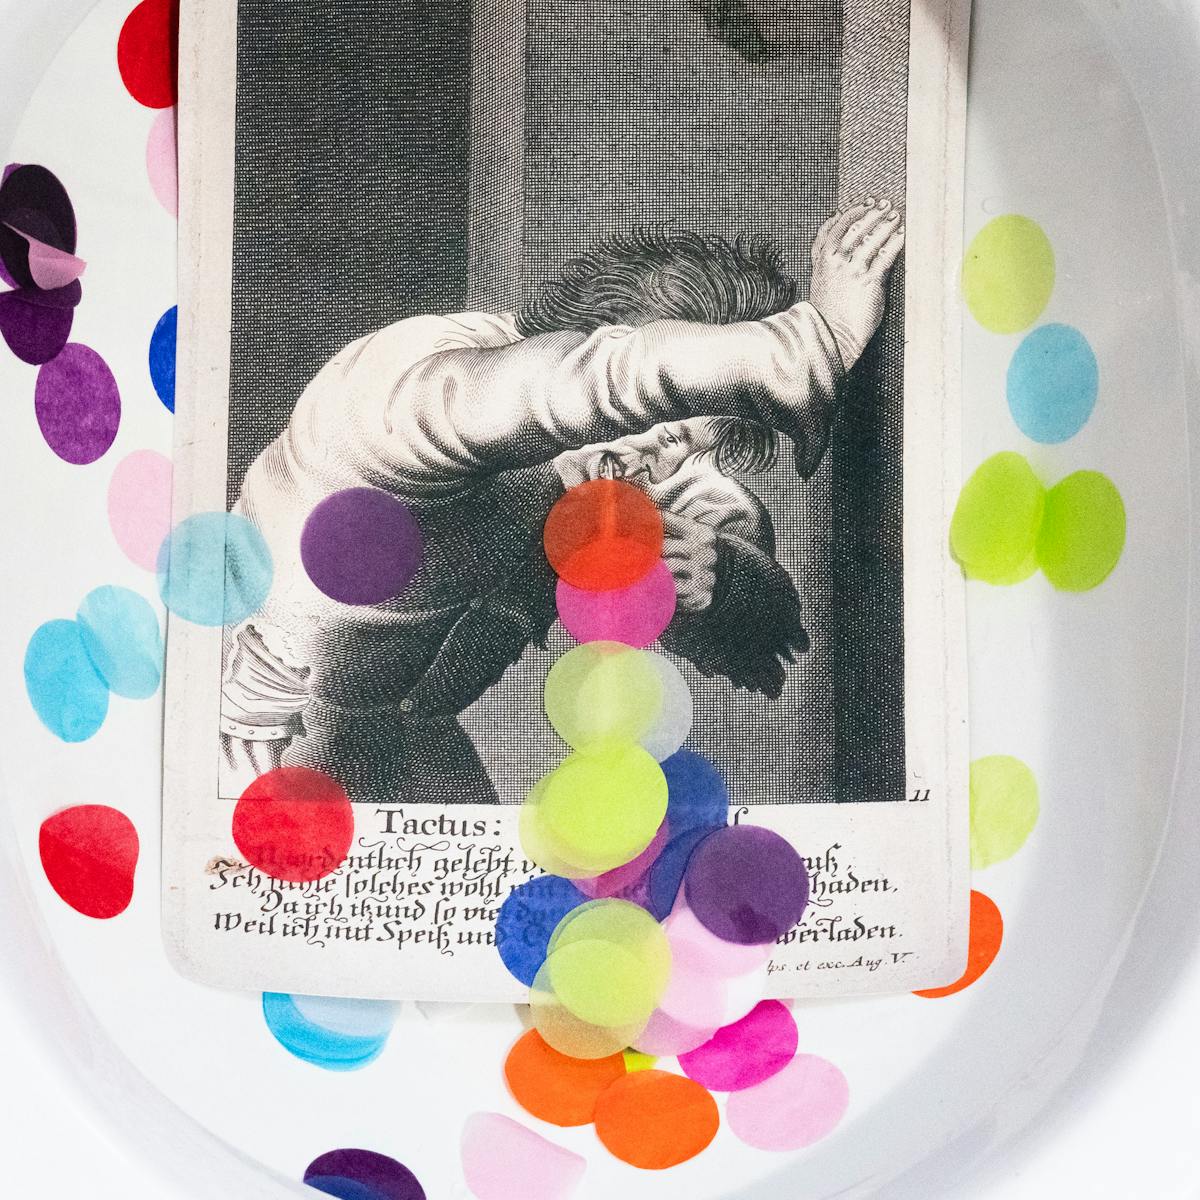 A photograph of a toilet bowl containing an illustration of a man vomiting, with multicoloured circles taking the place of the vomit.